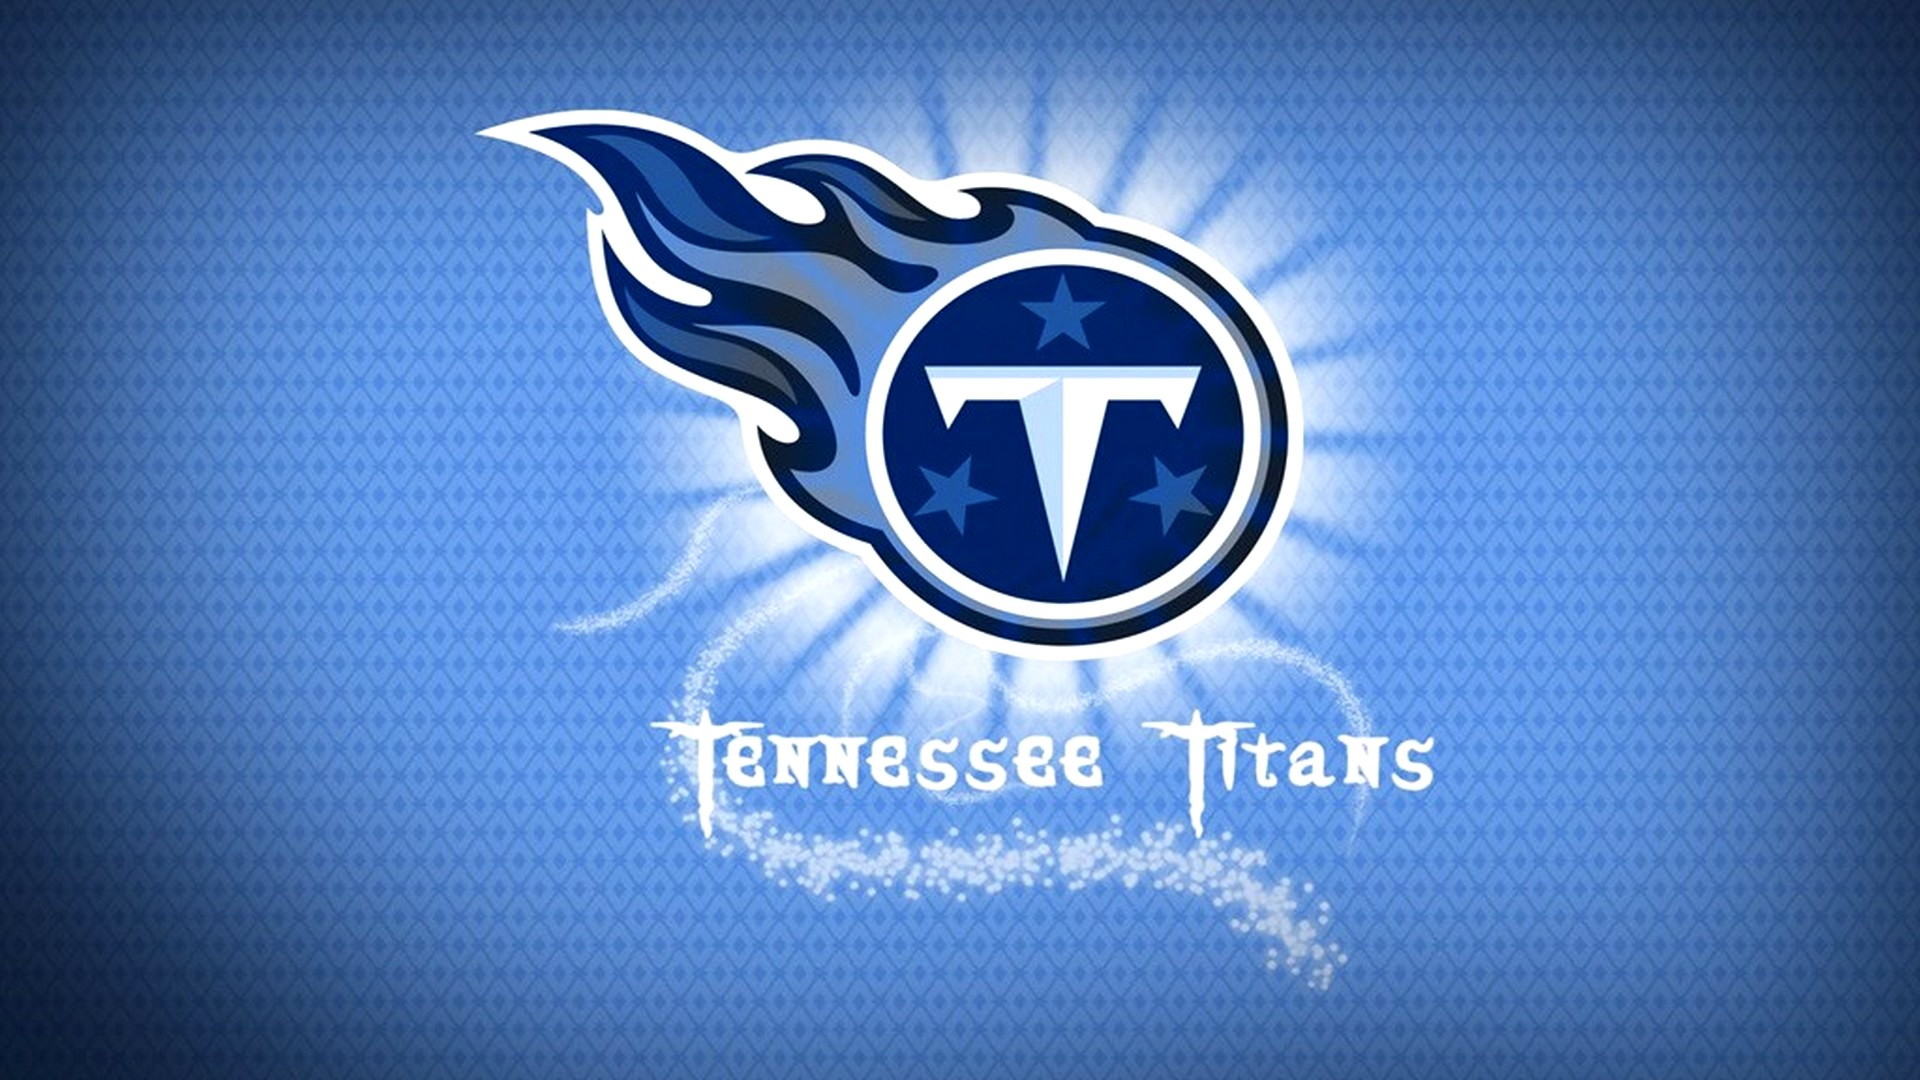 Tennessee Titans Macbook Backgrounds with high-resolution 1920x1080 pixel. You can use and set as wallpaper for Notebook Screensavers, Mac Wallpapers, Mobile Home Screen, iPhone or Android Phones Lock Screen